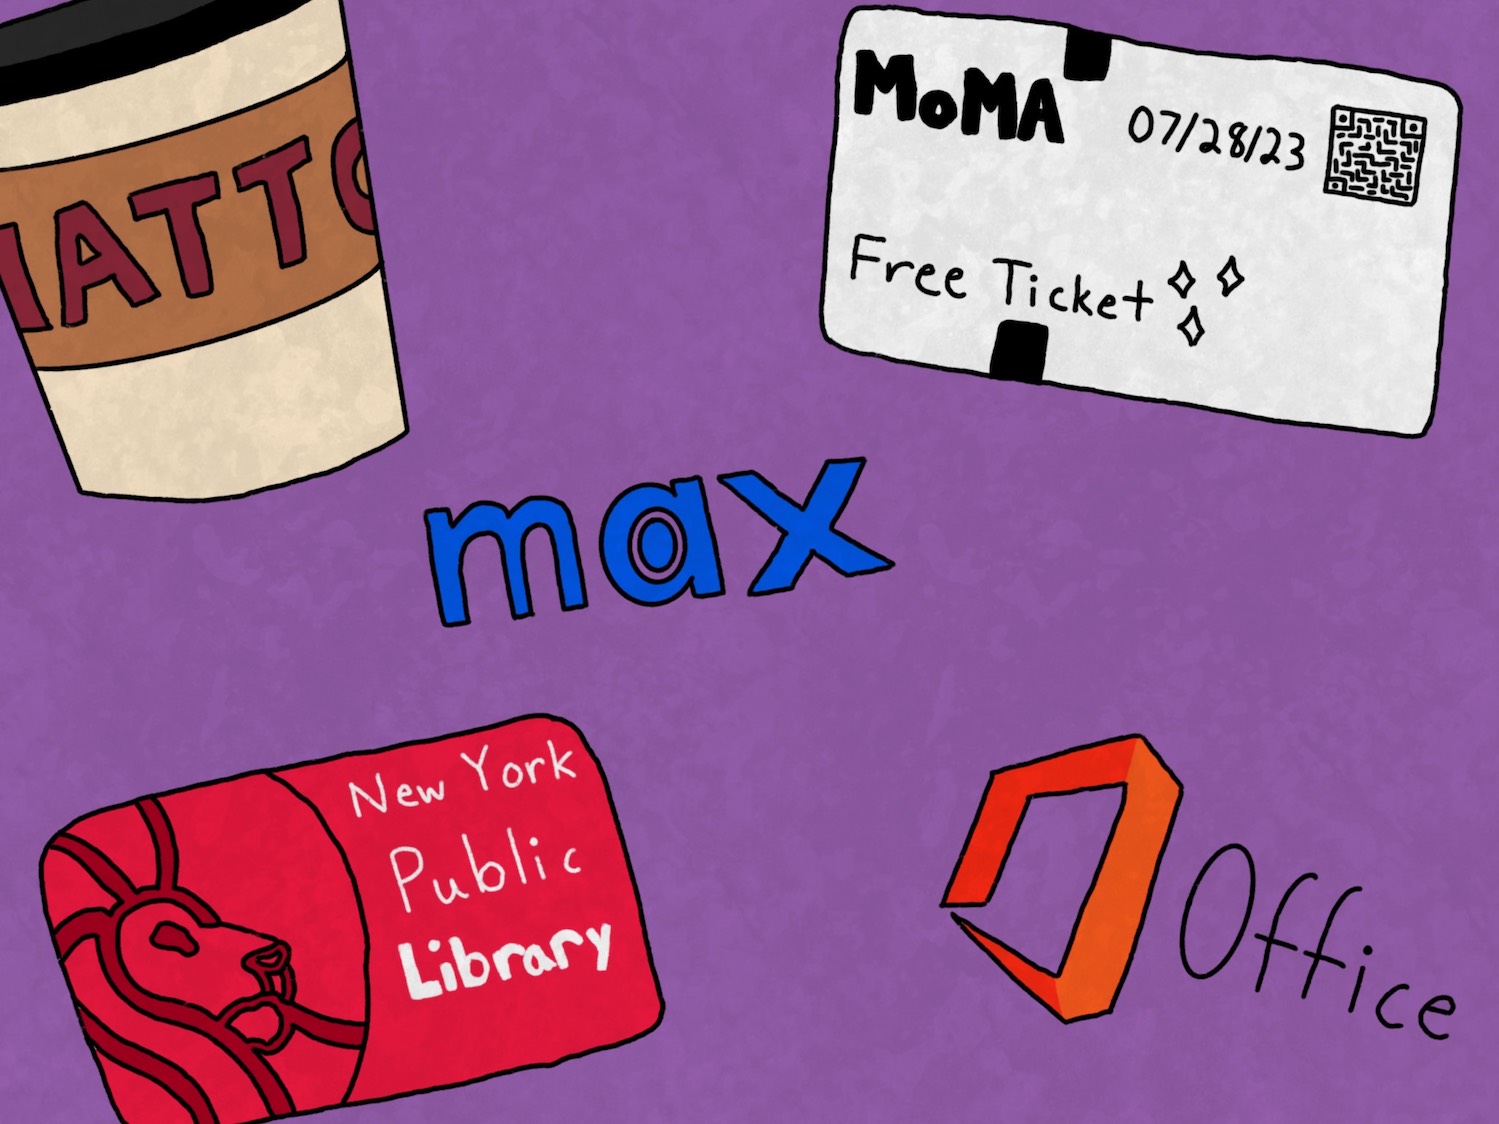 An illustration of a coffee cup with letters A.T.T. printed on it, a Museum of Modern Art free ticket, a logo of I. Max, a library card of the New York Public Library and the logo of Microsoft office against a purple background.